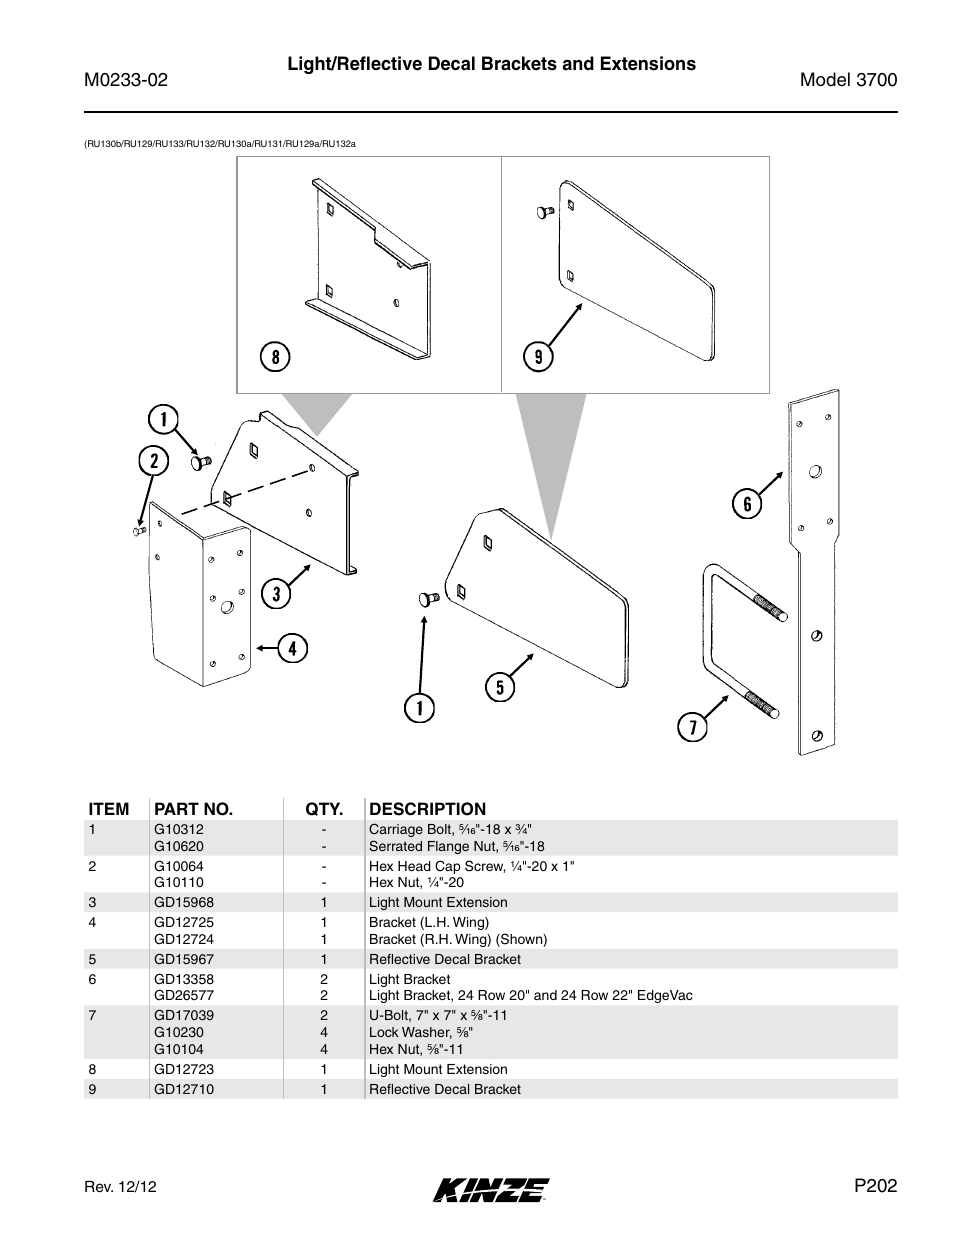 Light/reflective decal brackets and extensions, P202 | Kinze 3700 Front Folding Planter Rev. 6/14 User Manual | Page 205 / 284